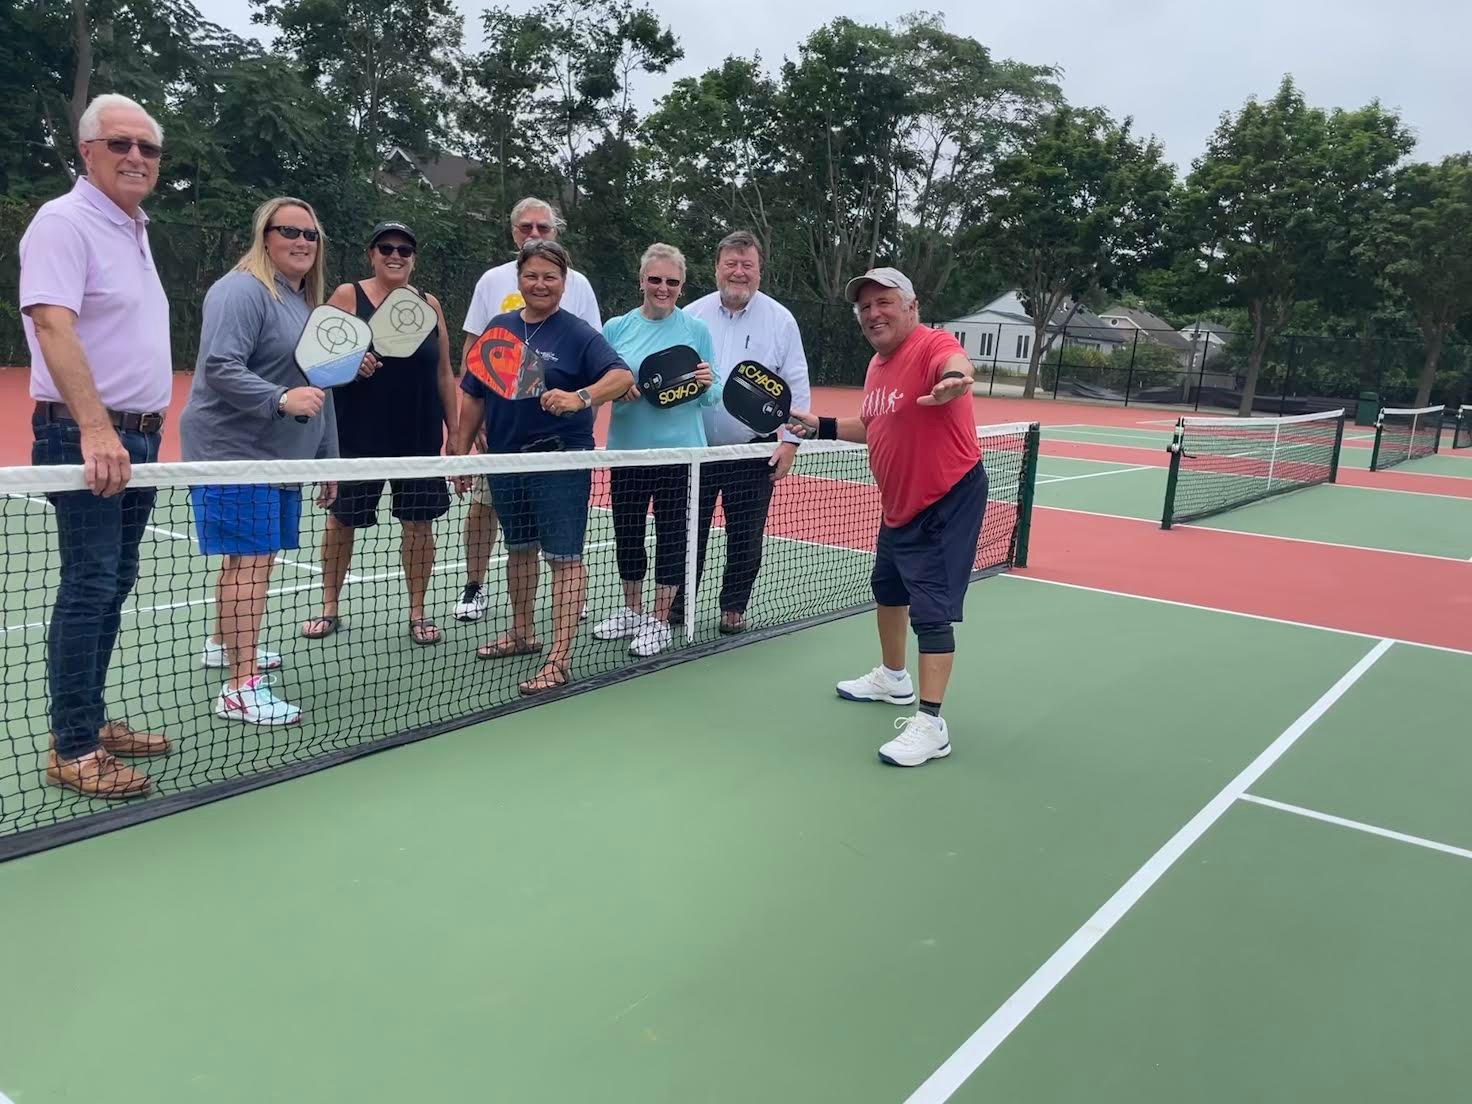 New pickleball courts are now open The Long Island Advance